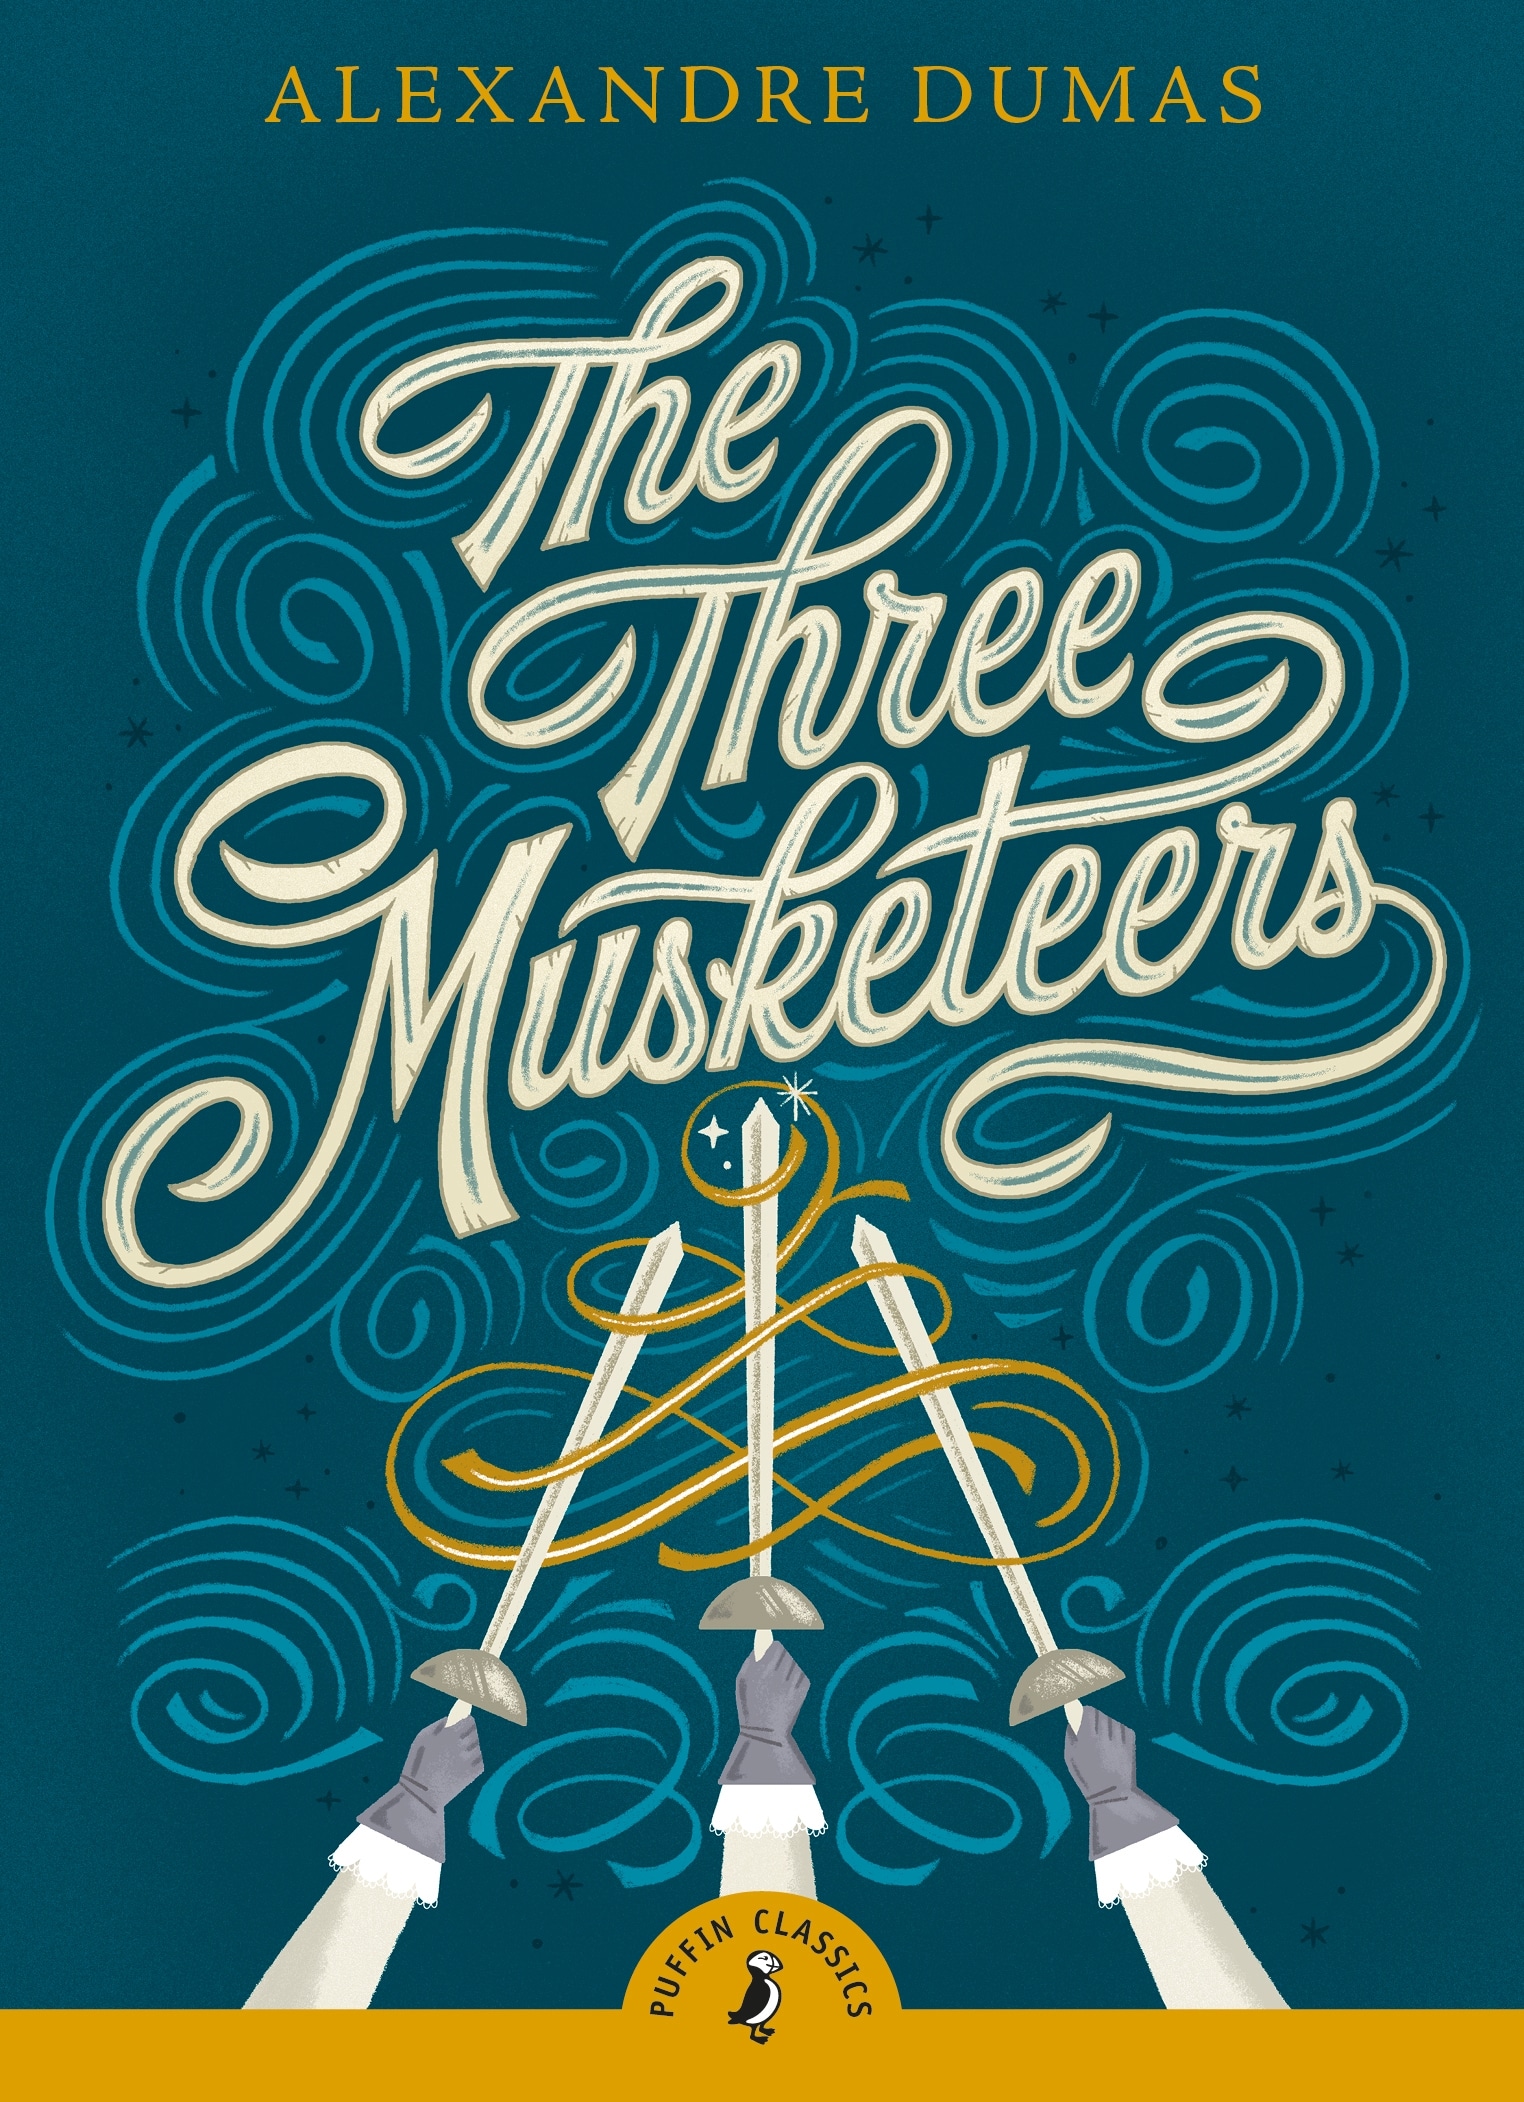 Book “The Three Musketeers” by Alexandre Dumas — September 19, 2019